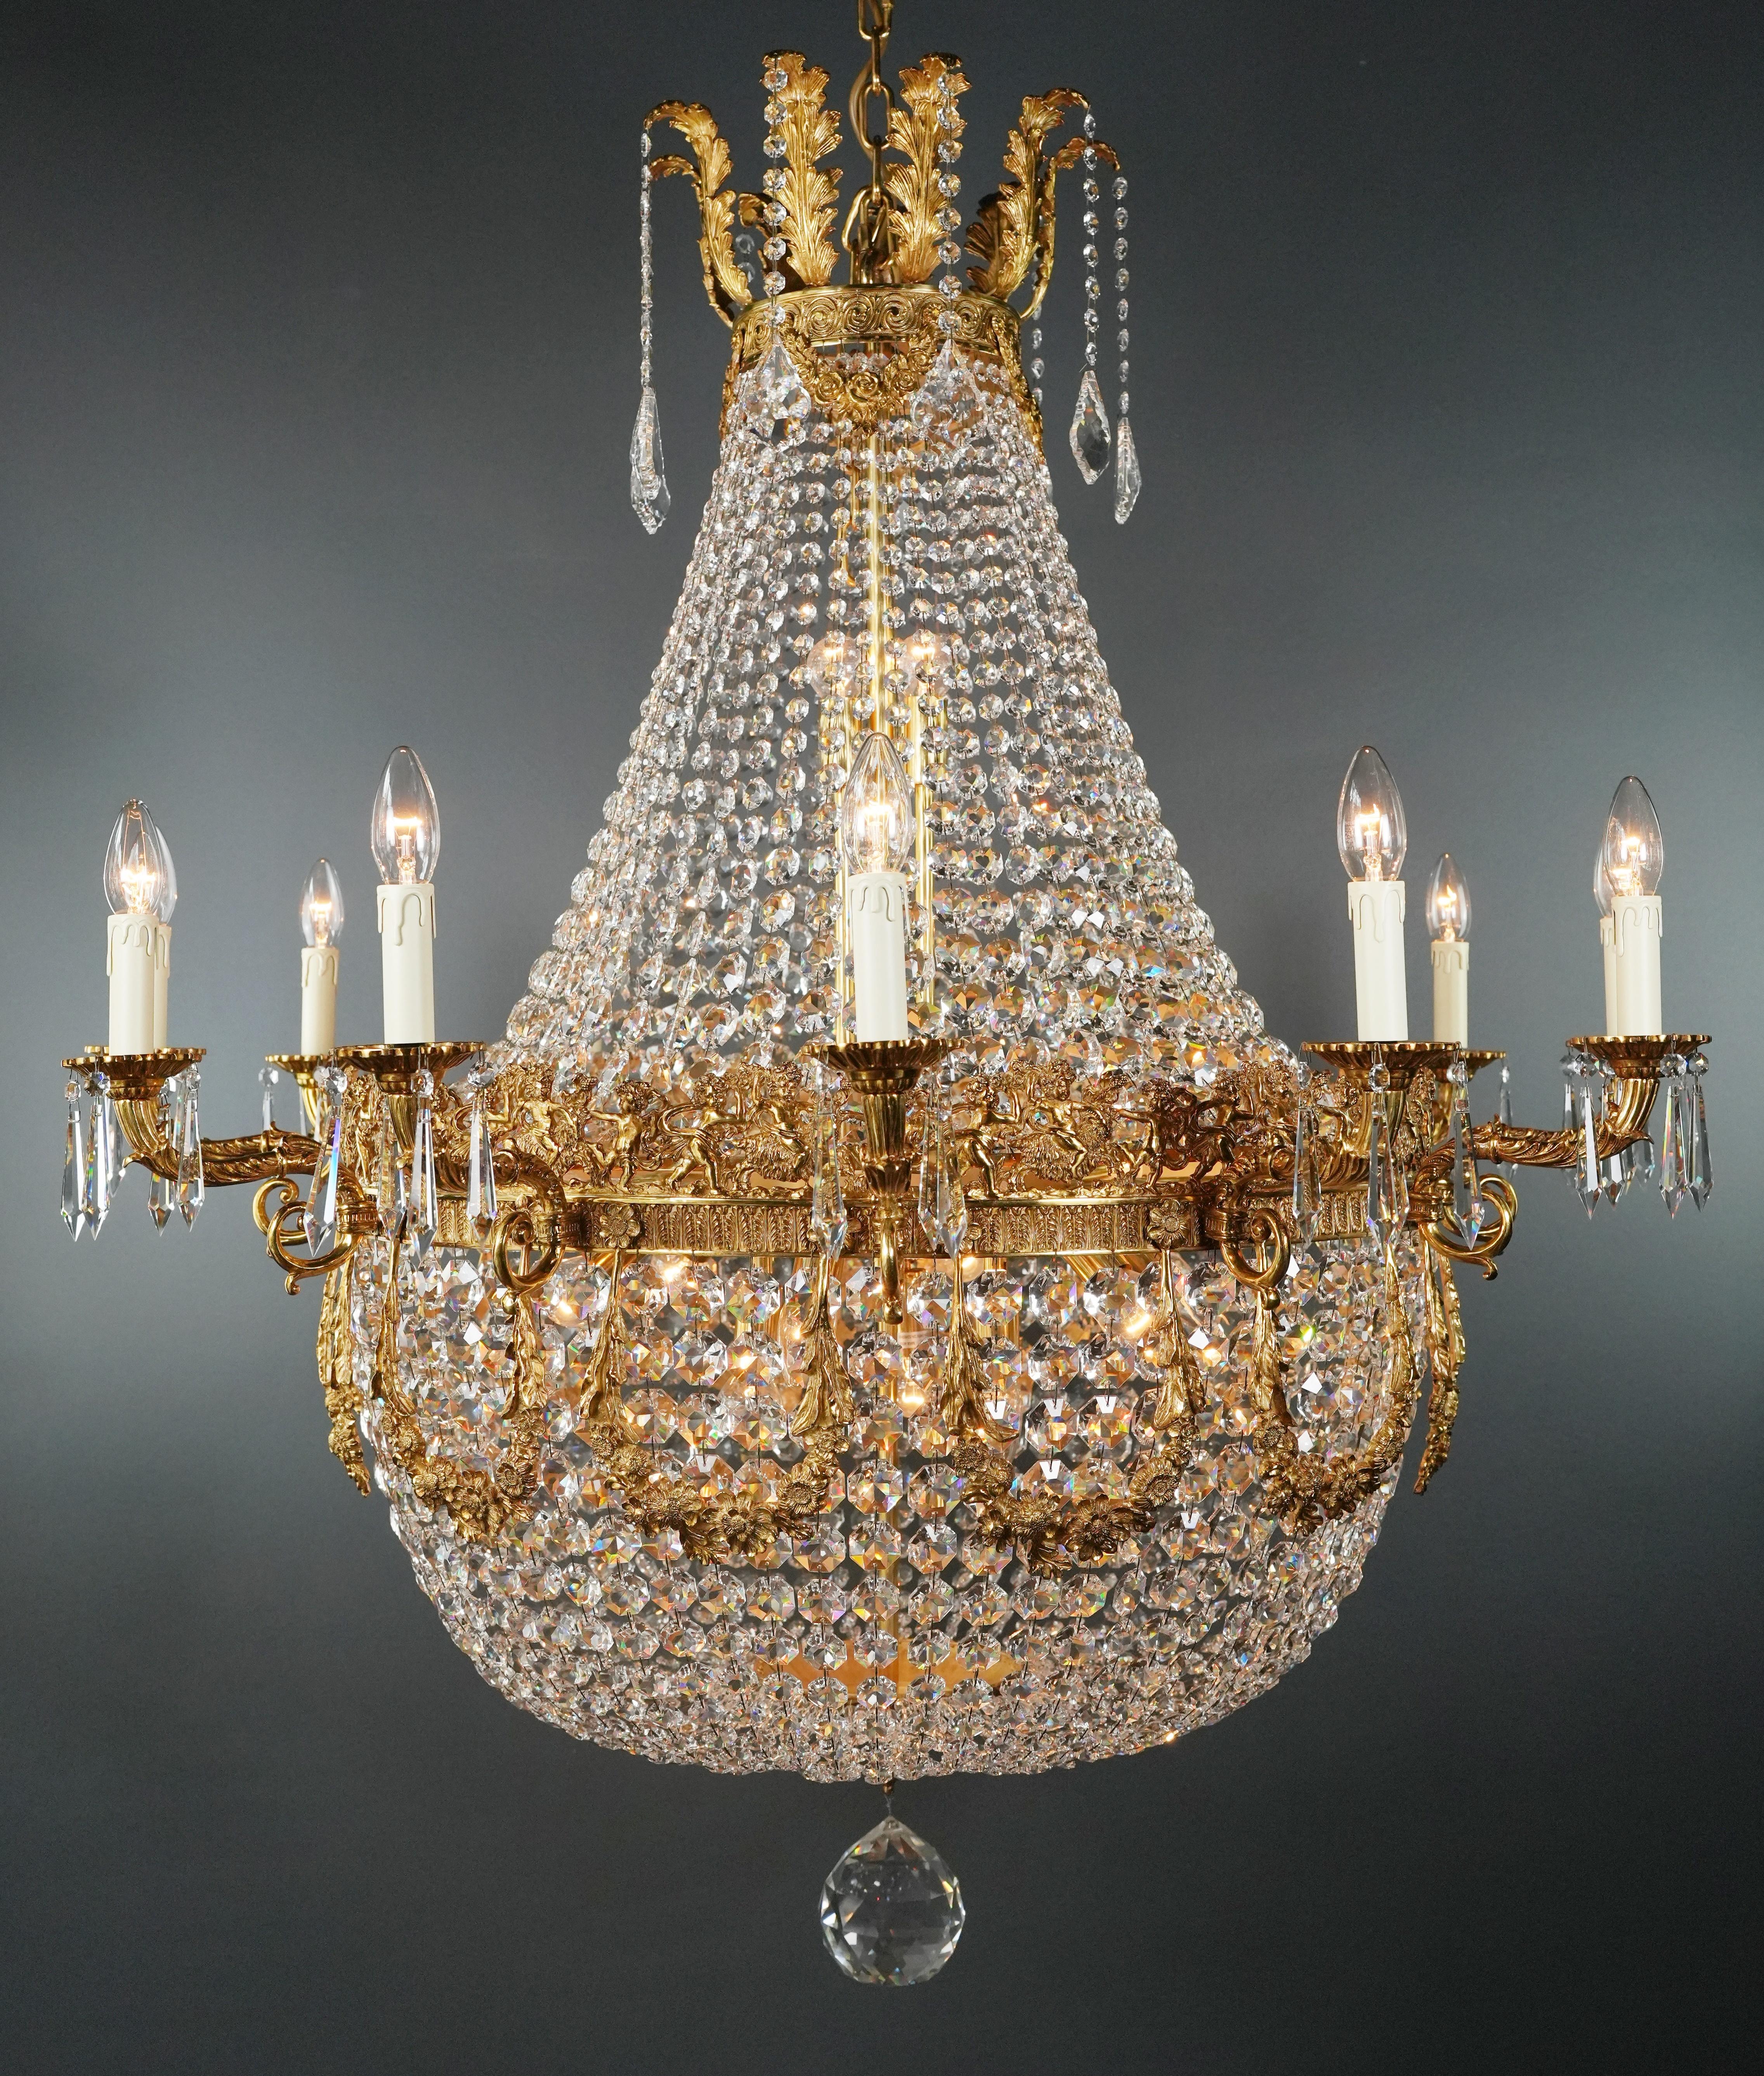 French Provincial Wreat Brass Basket Empire Sac a Pearl Chandelier Crystal and Antique Gold For Sale